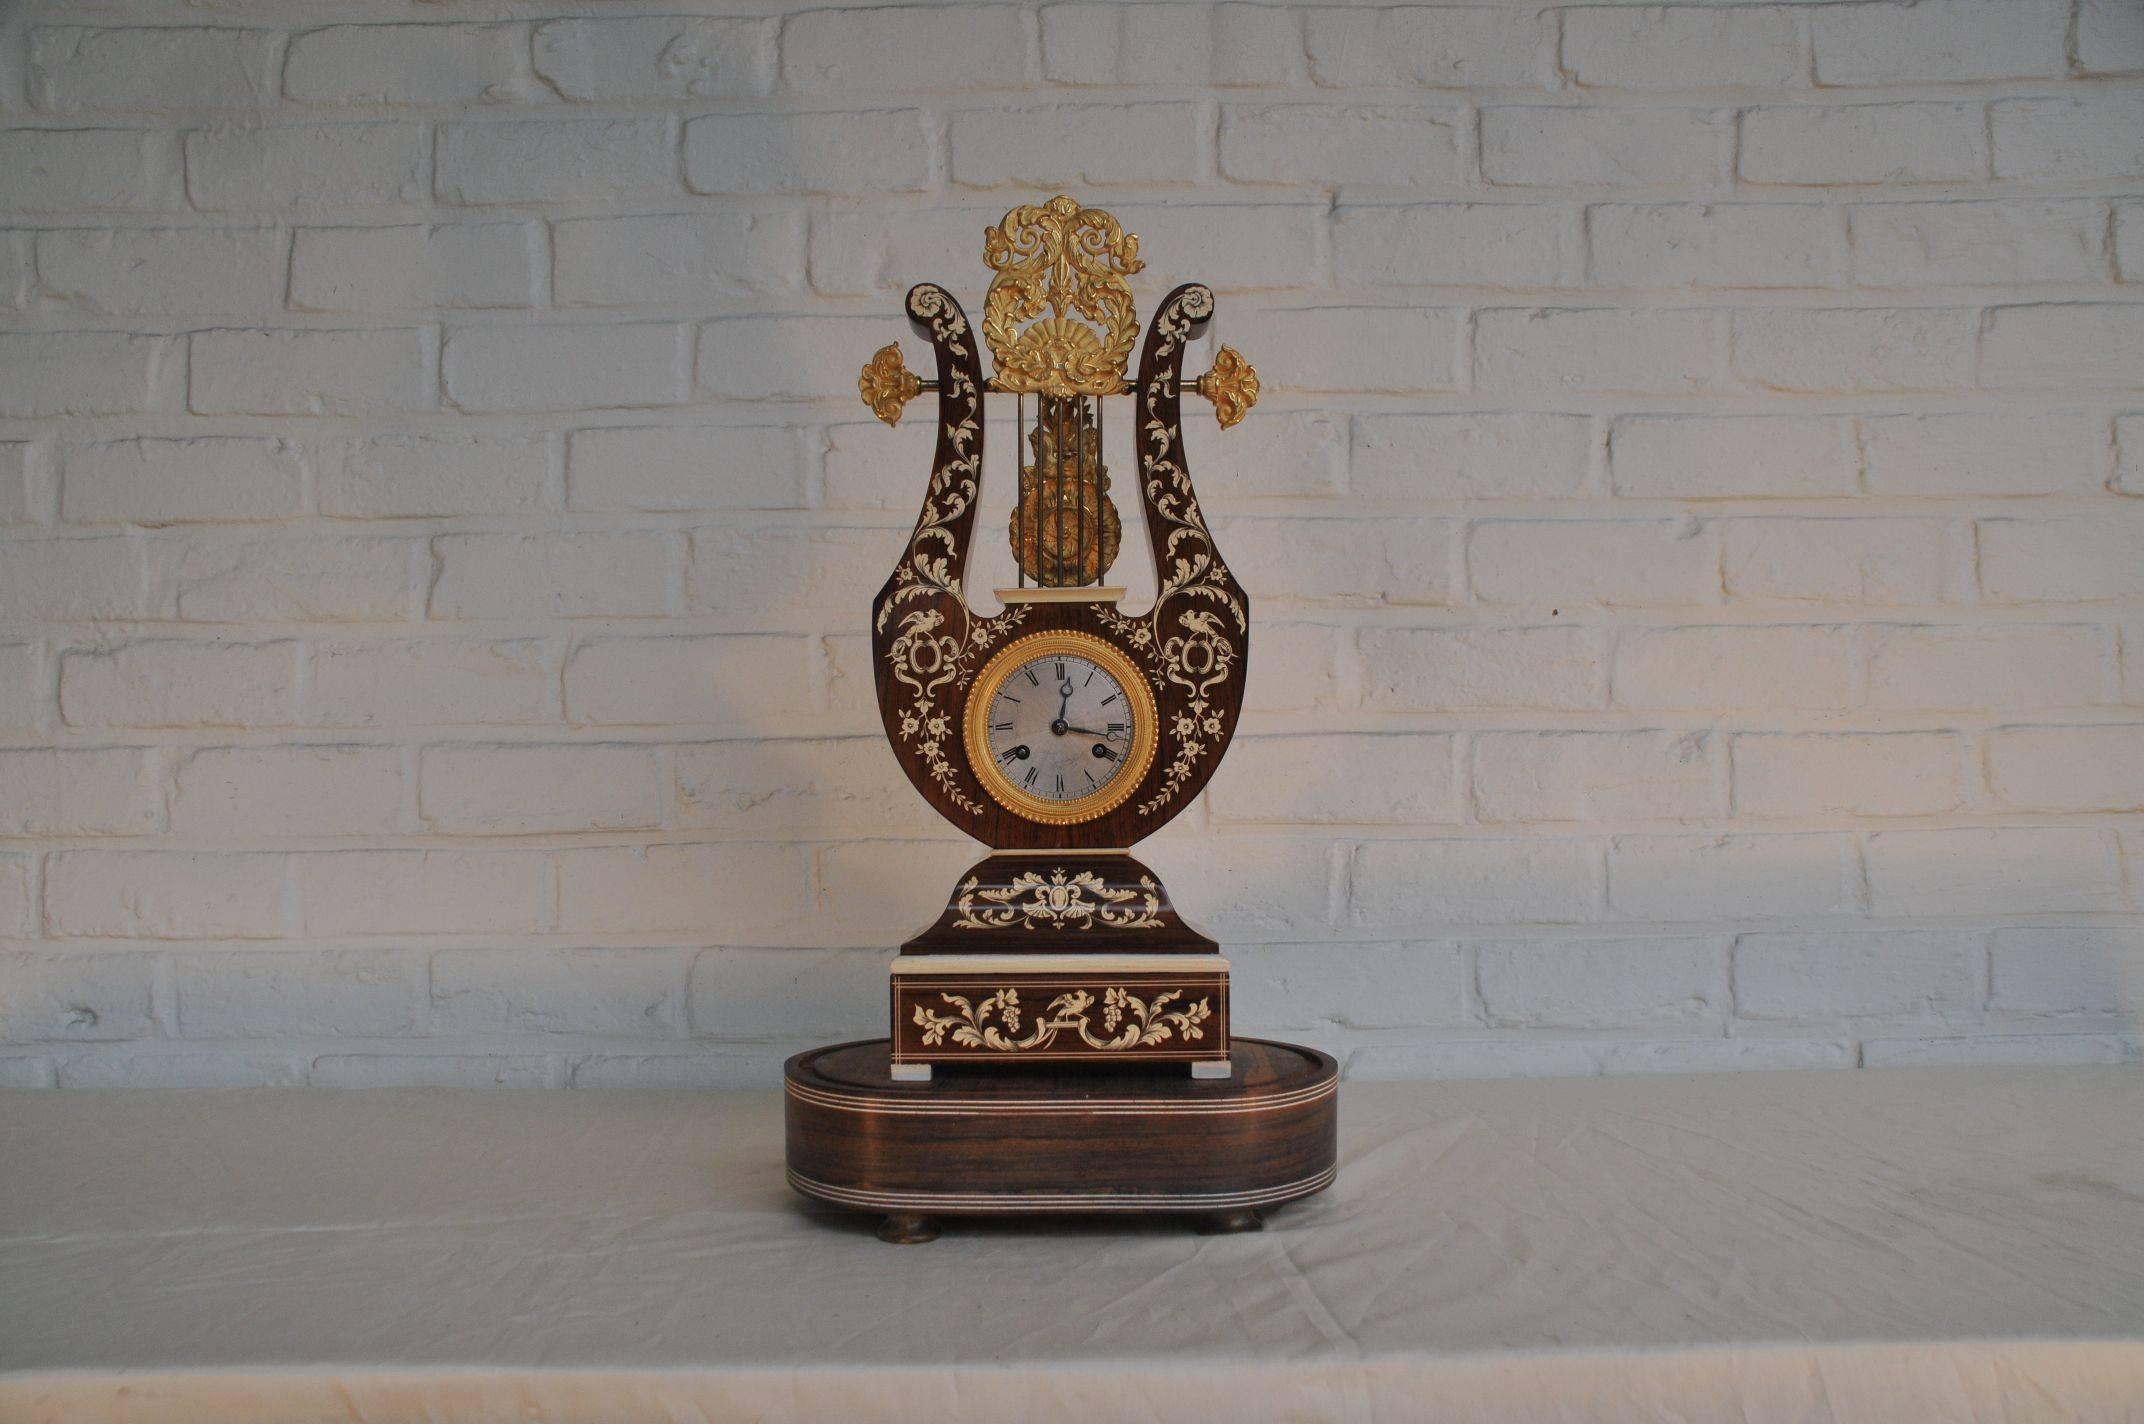 Restoration period, circa 1830, stamped Thevenard.
On original stand, under domed glass.

French Charles X period ormolu-mounted rosewood bone inlaid portico mantel clock. Inlaid overall with floral sprays and birds. Rare lyre shaped. The silvered